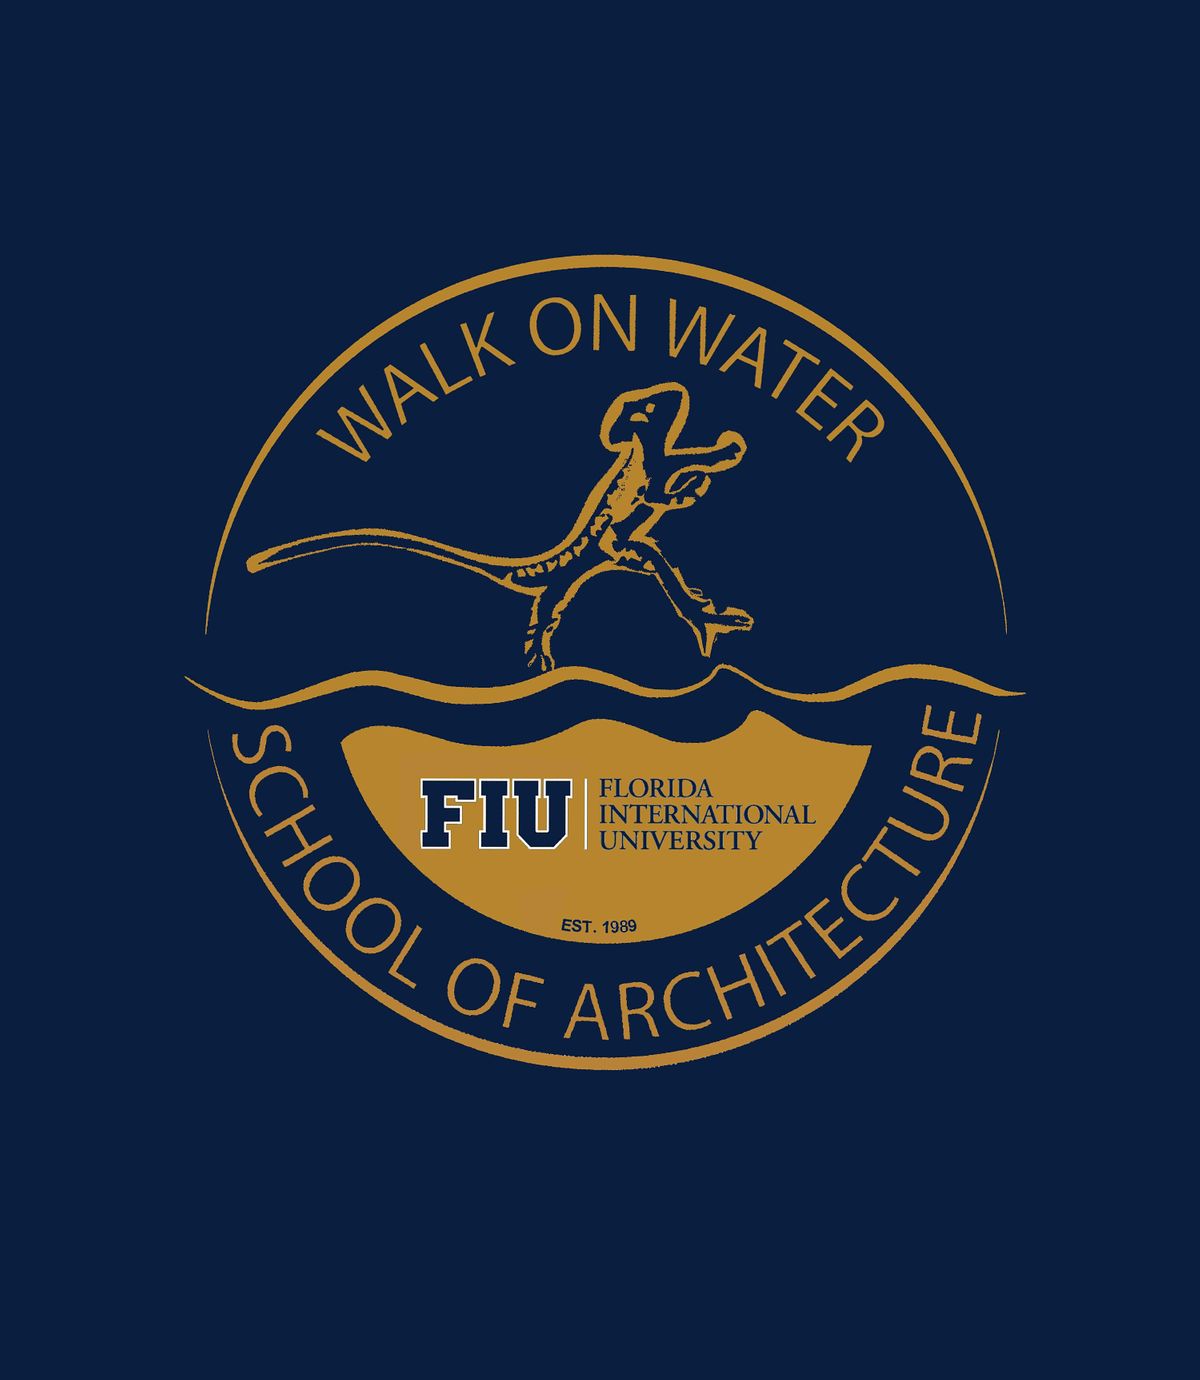 FIU Walk on Water 2021 - Participant Registration